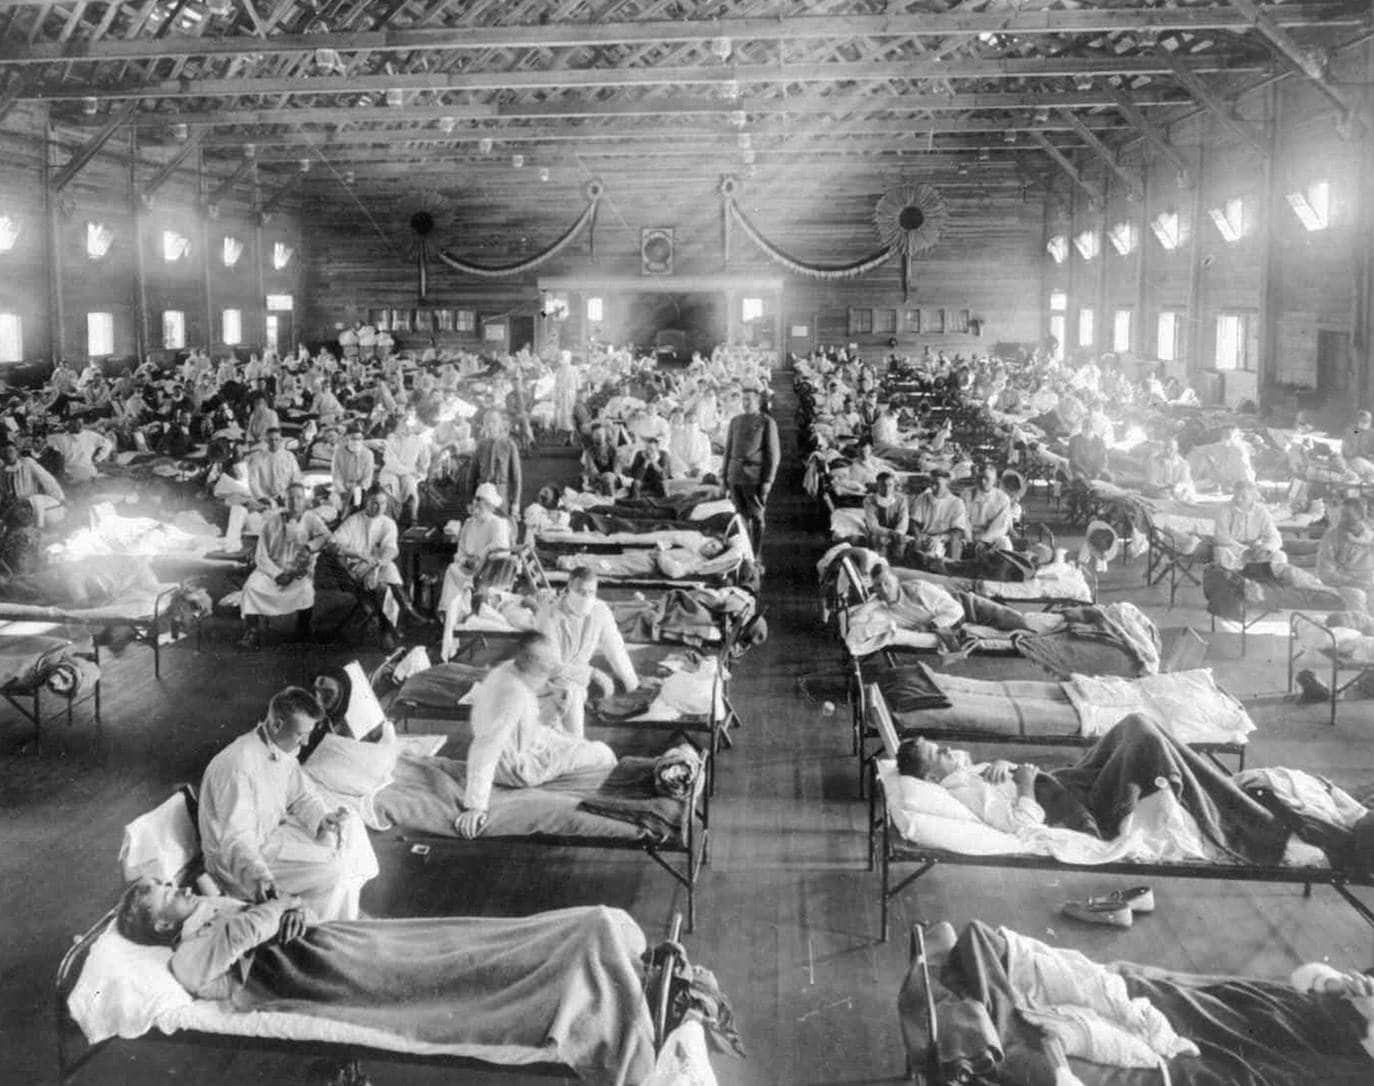 The flu in circulation is a heir strain of the one that caused the 1918 pandemic